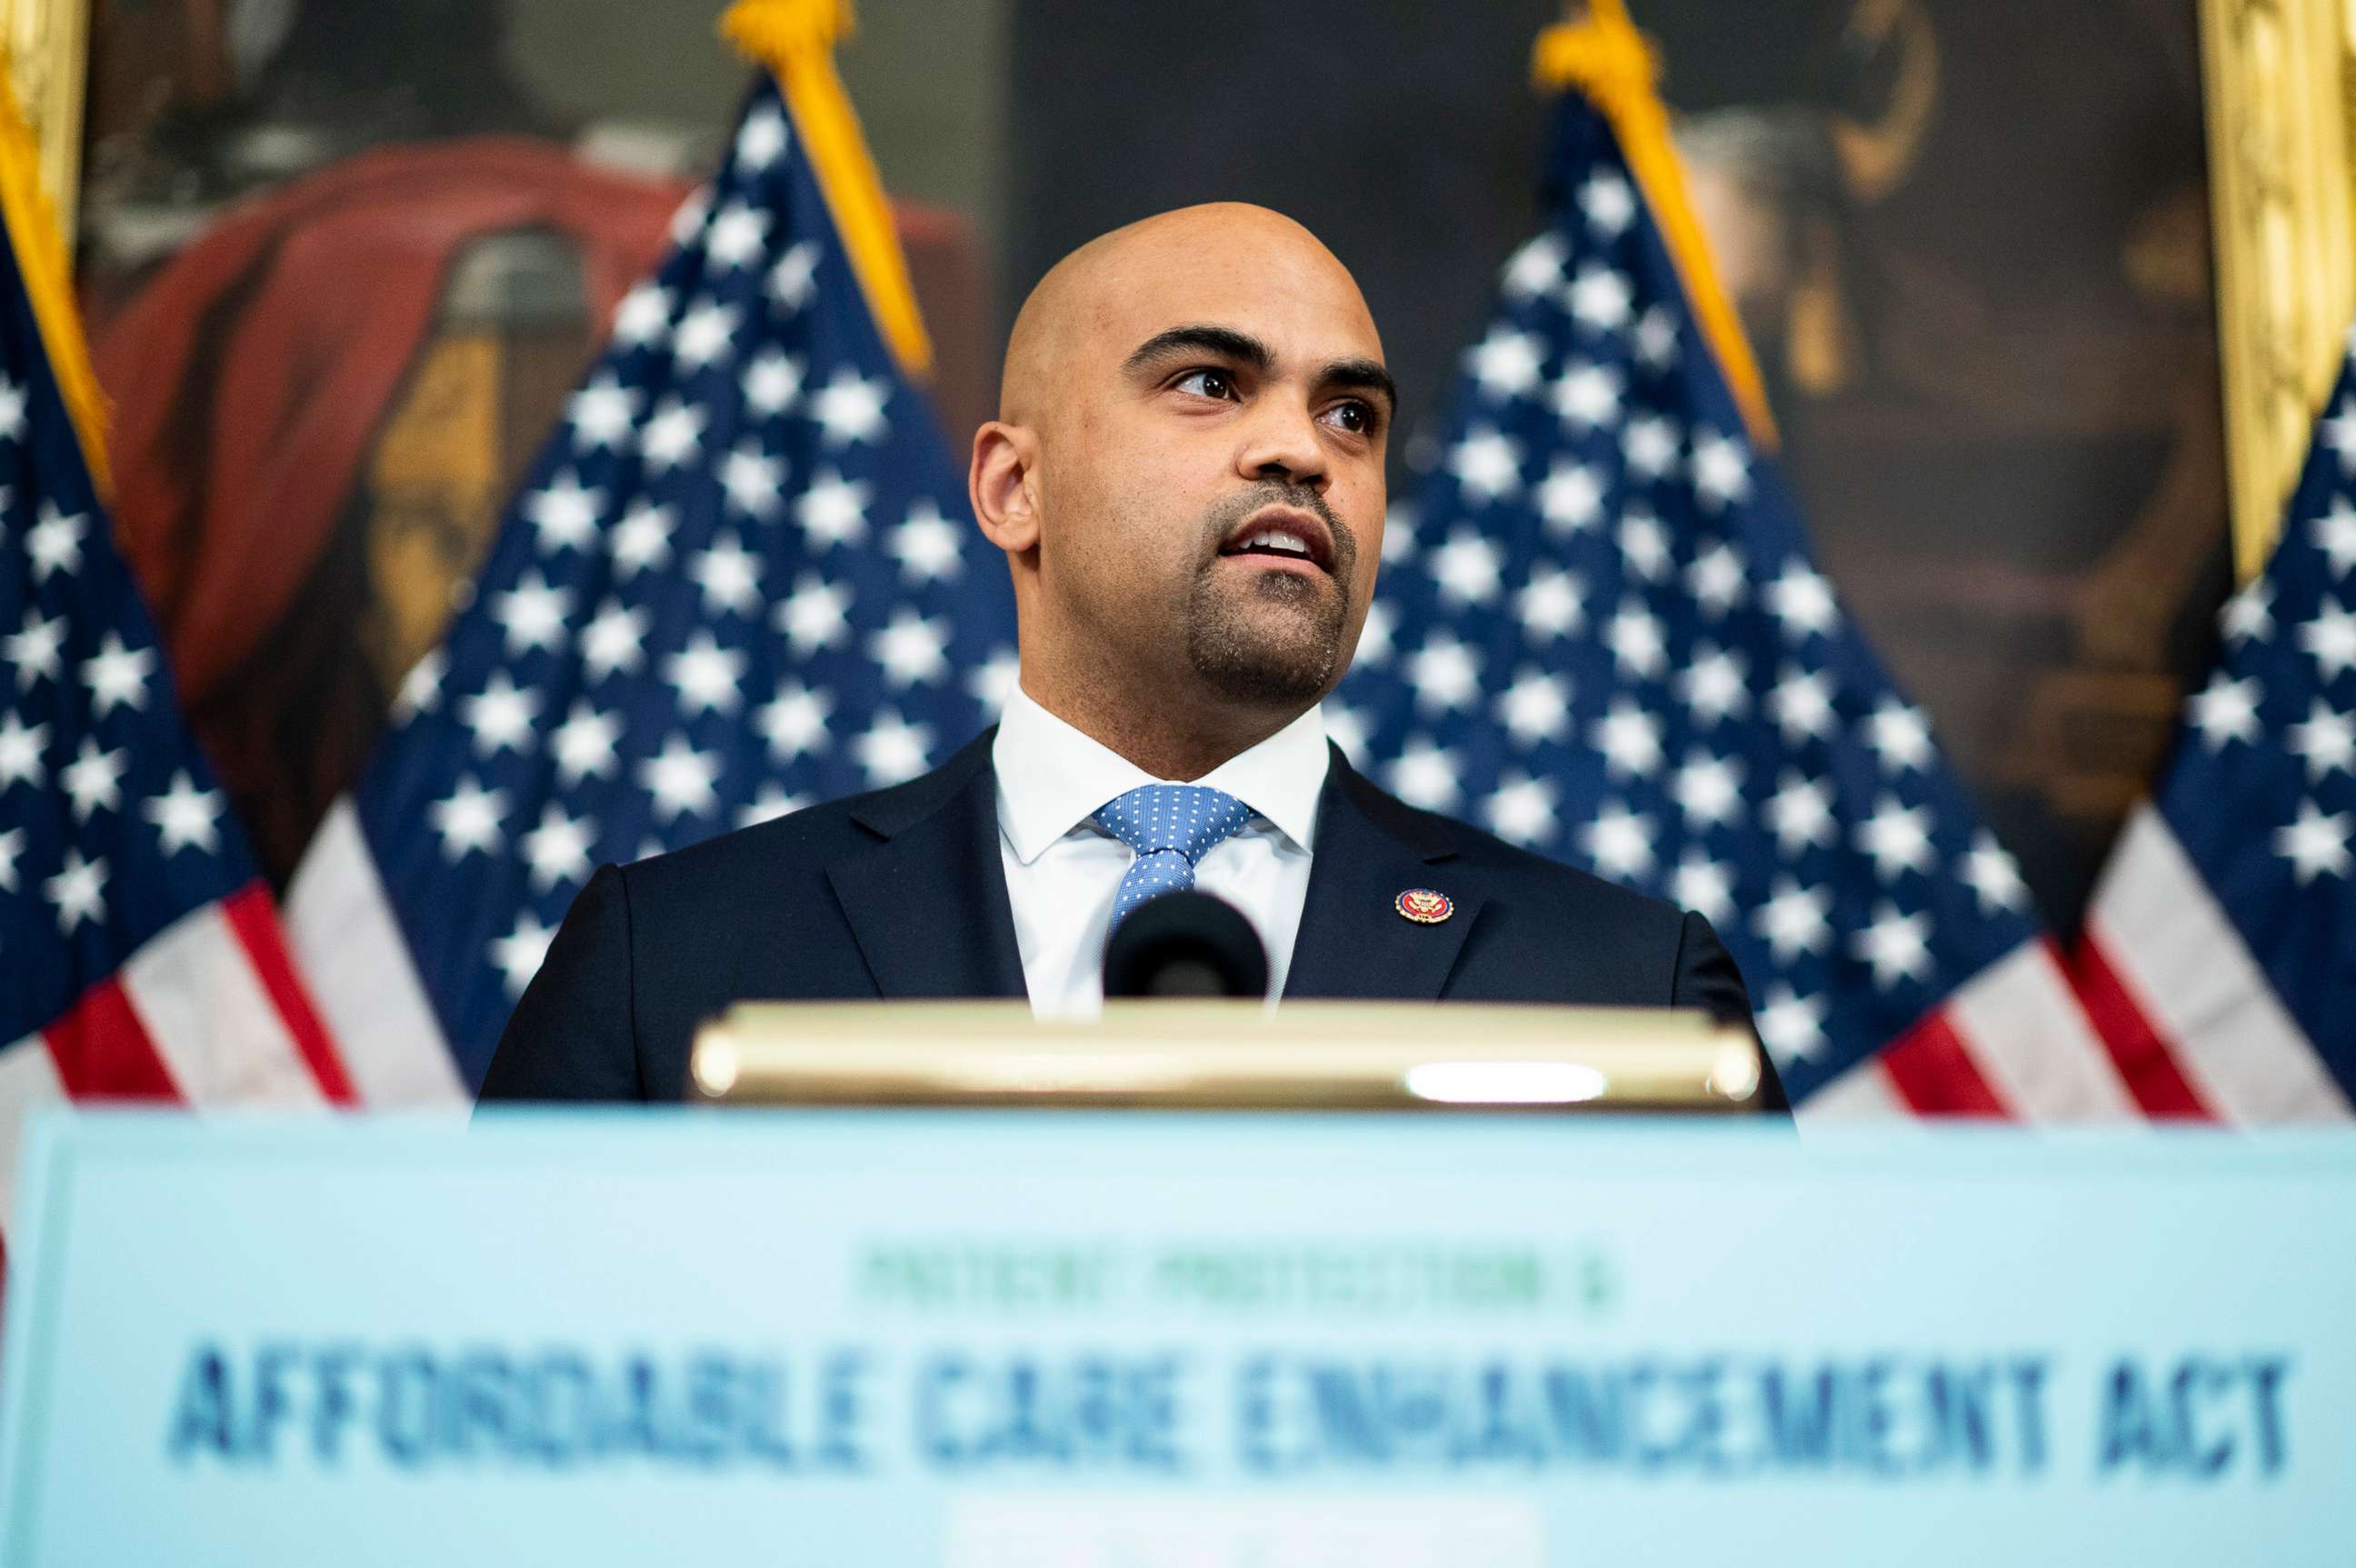 PHOTO: Rep. Colin Allred speaks during a press conference in Washington, June 24, 2020.